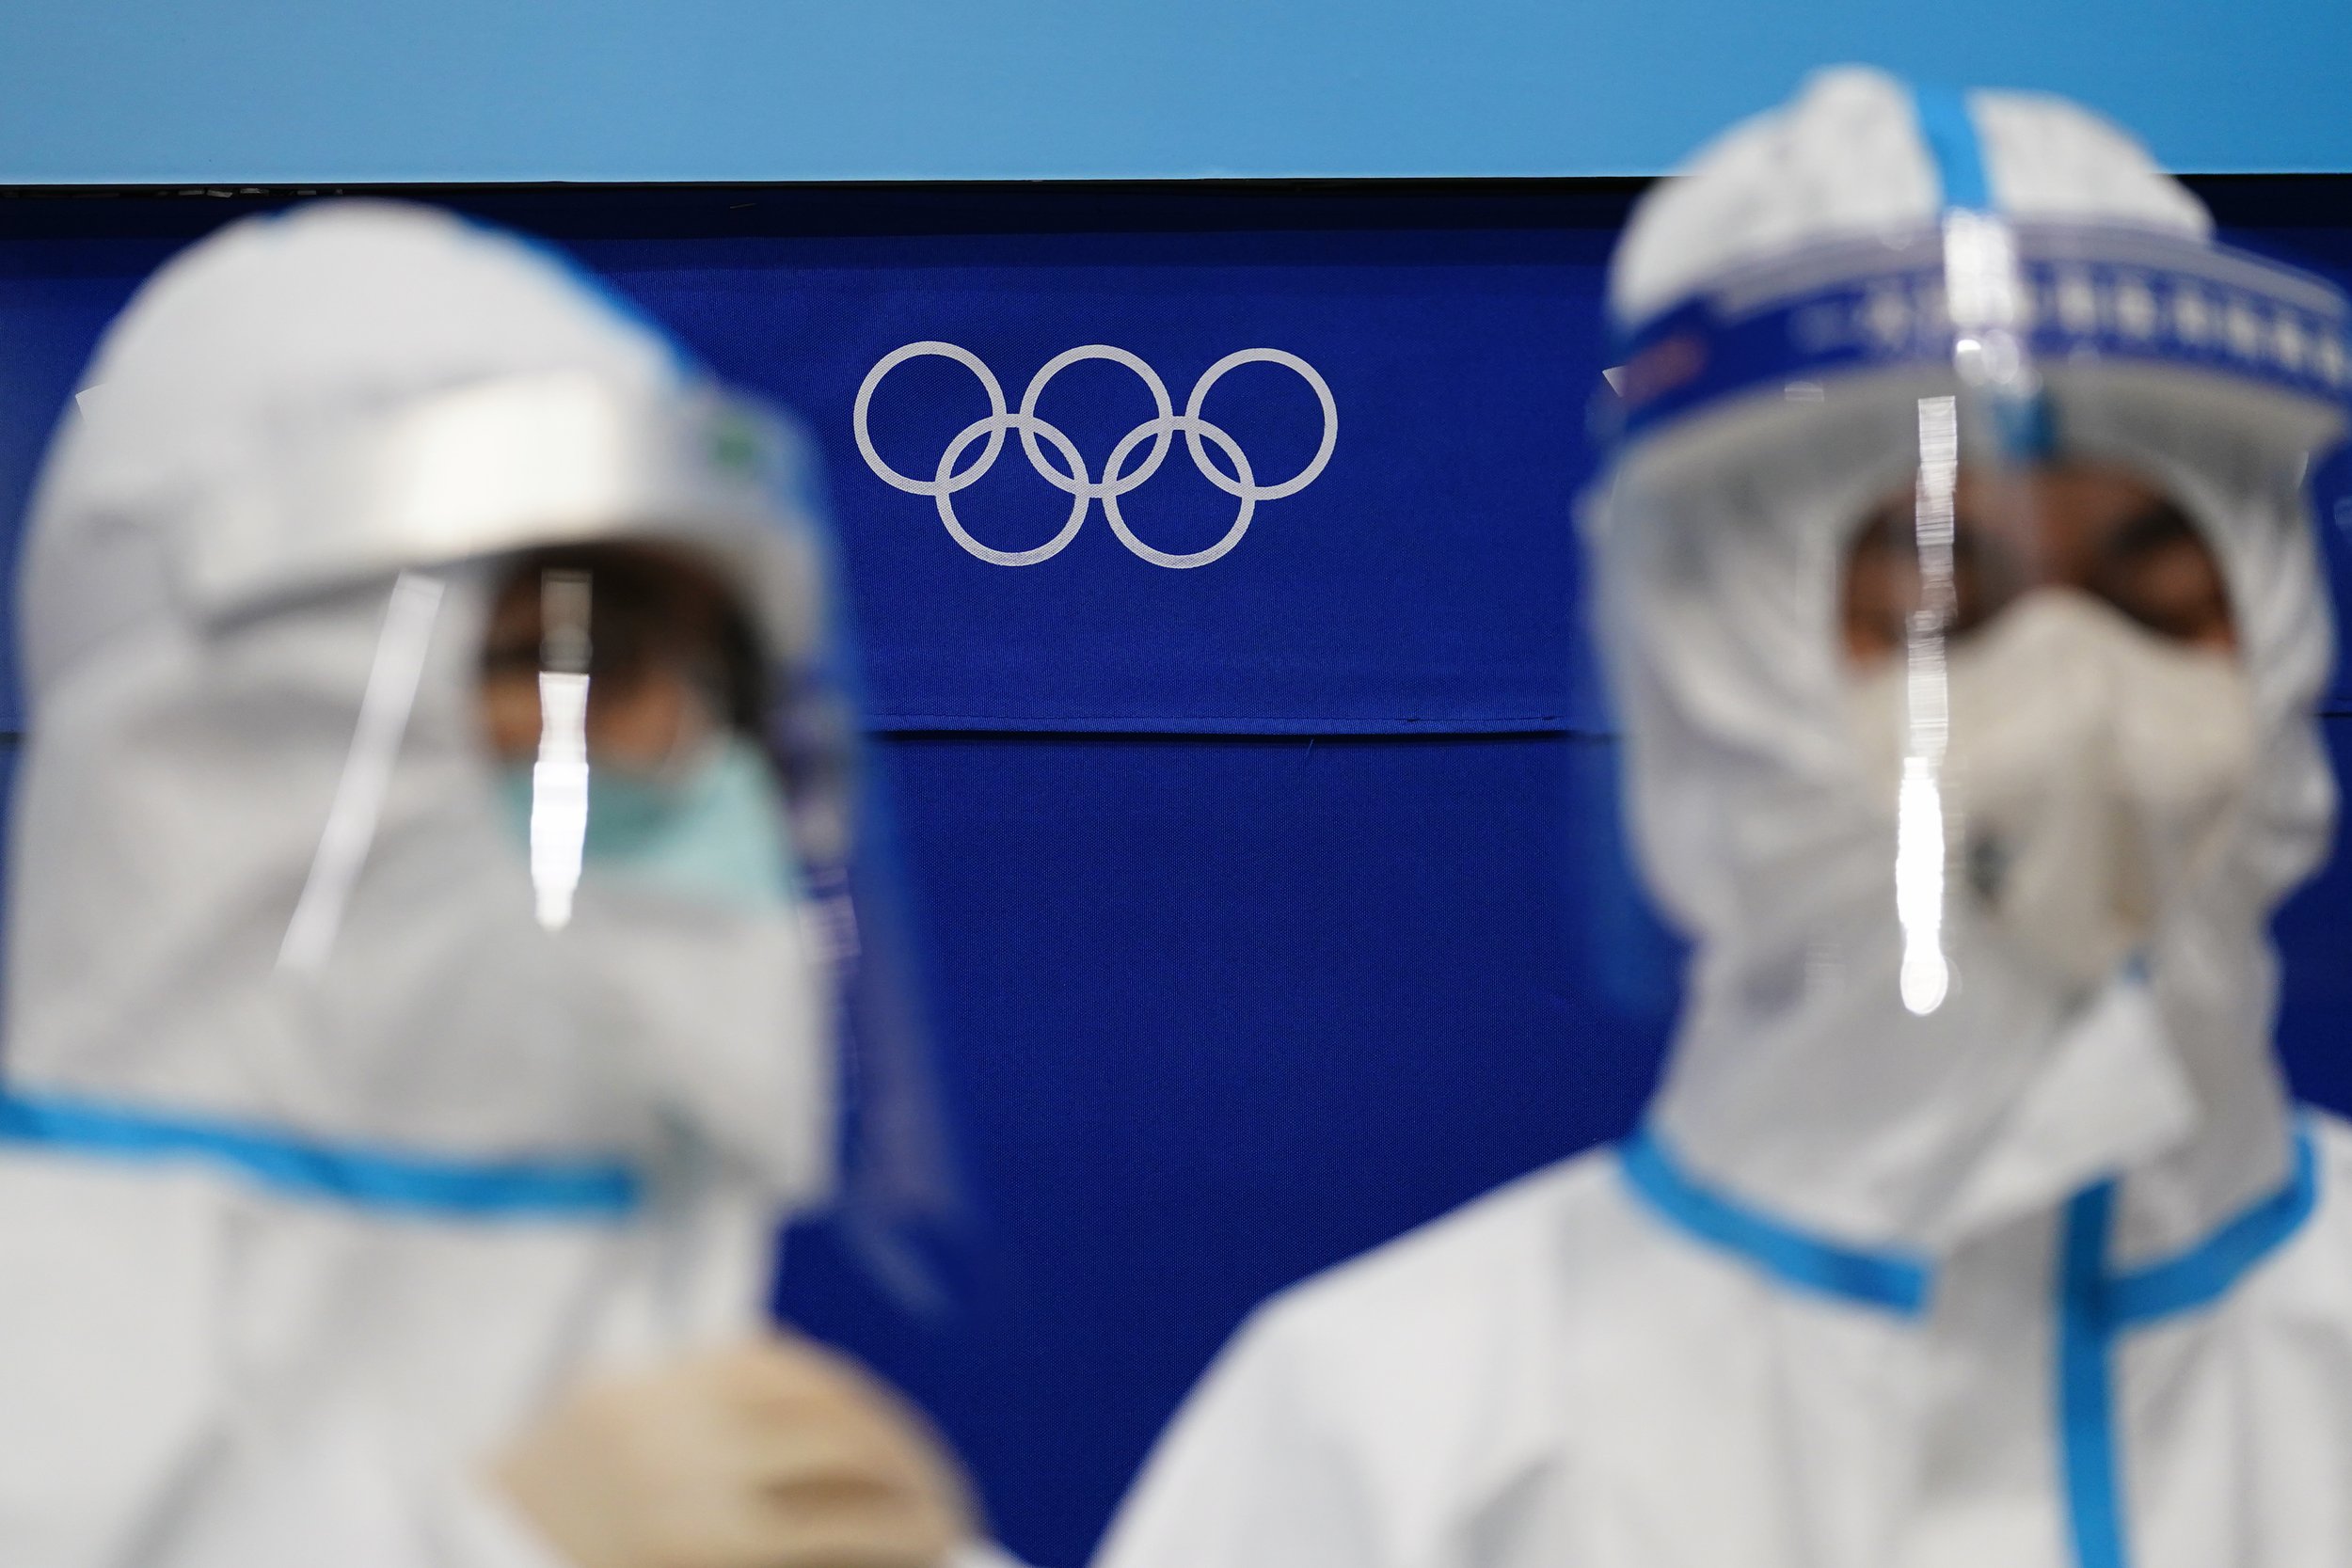  The Olympic rings are seen behind workers staged in protective equipment at the National Indoor Stadium at the 2022 Winter Olympics, Tuesday, Feb. 1, 2022, in Beijing. (AP Photo/Matt Slocum) 